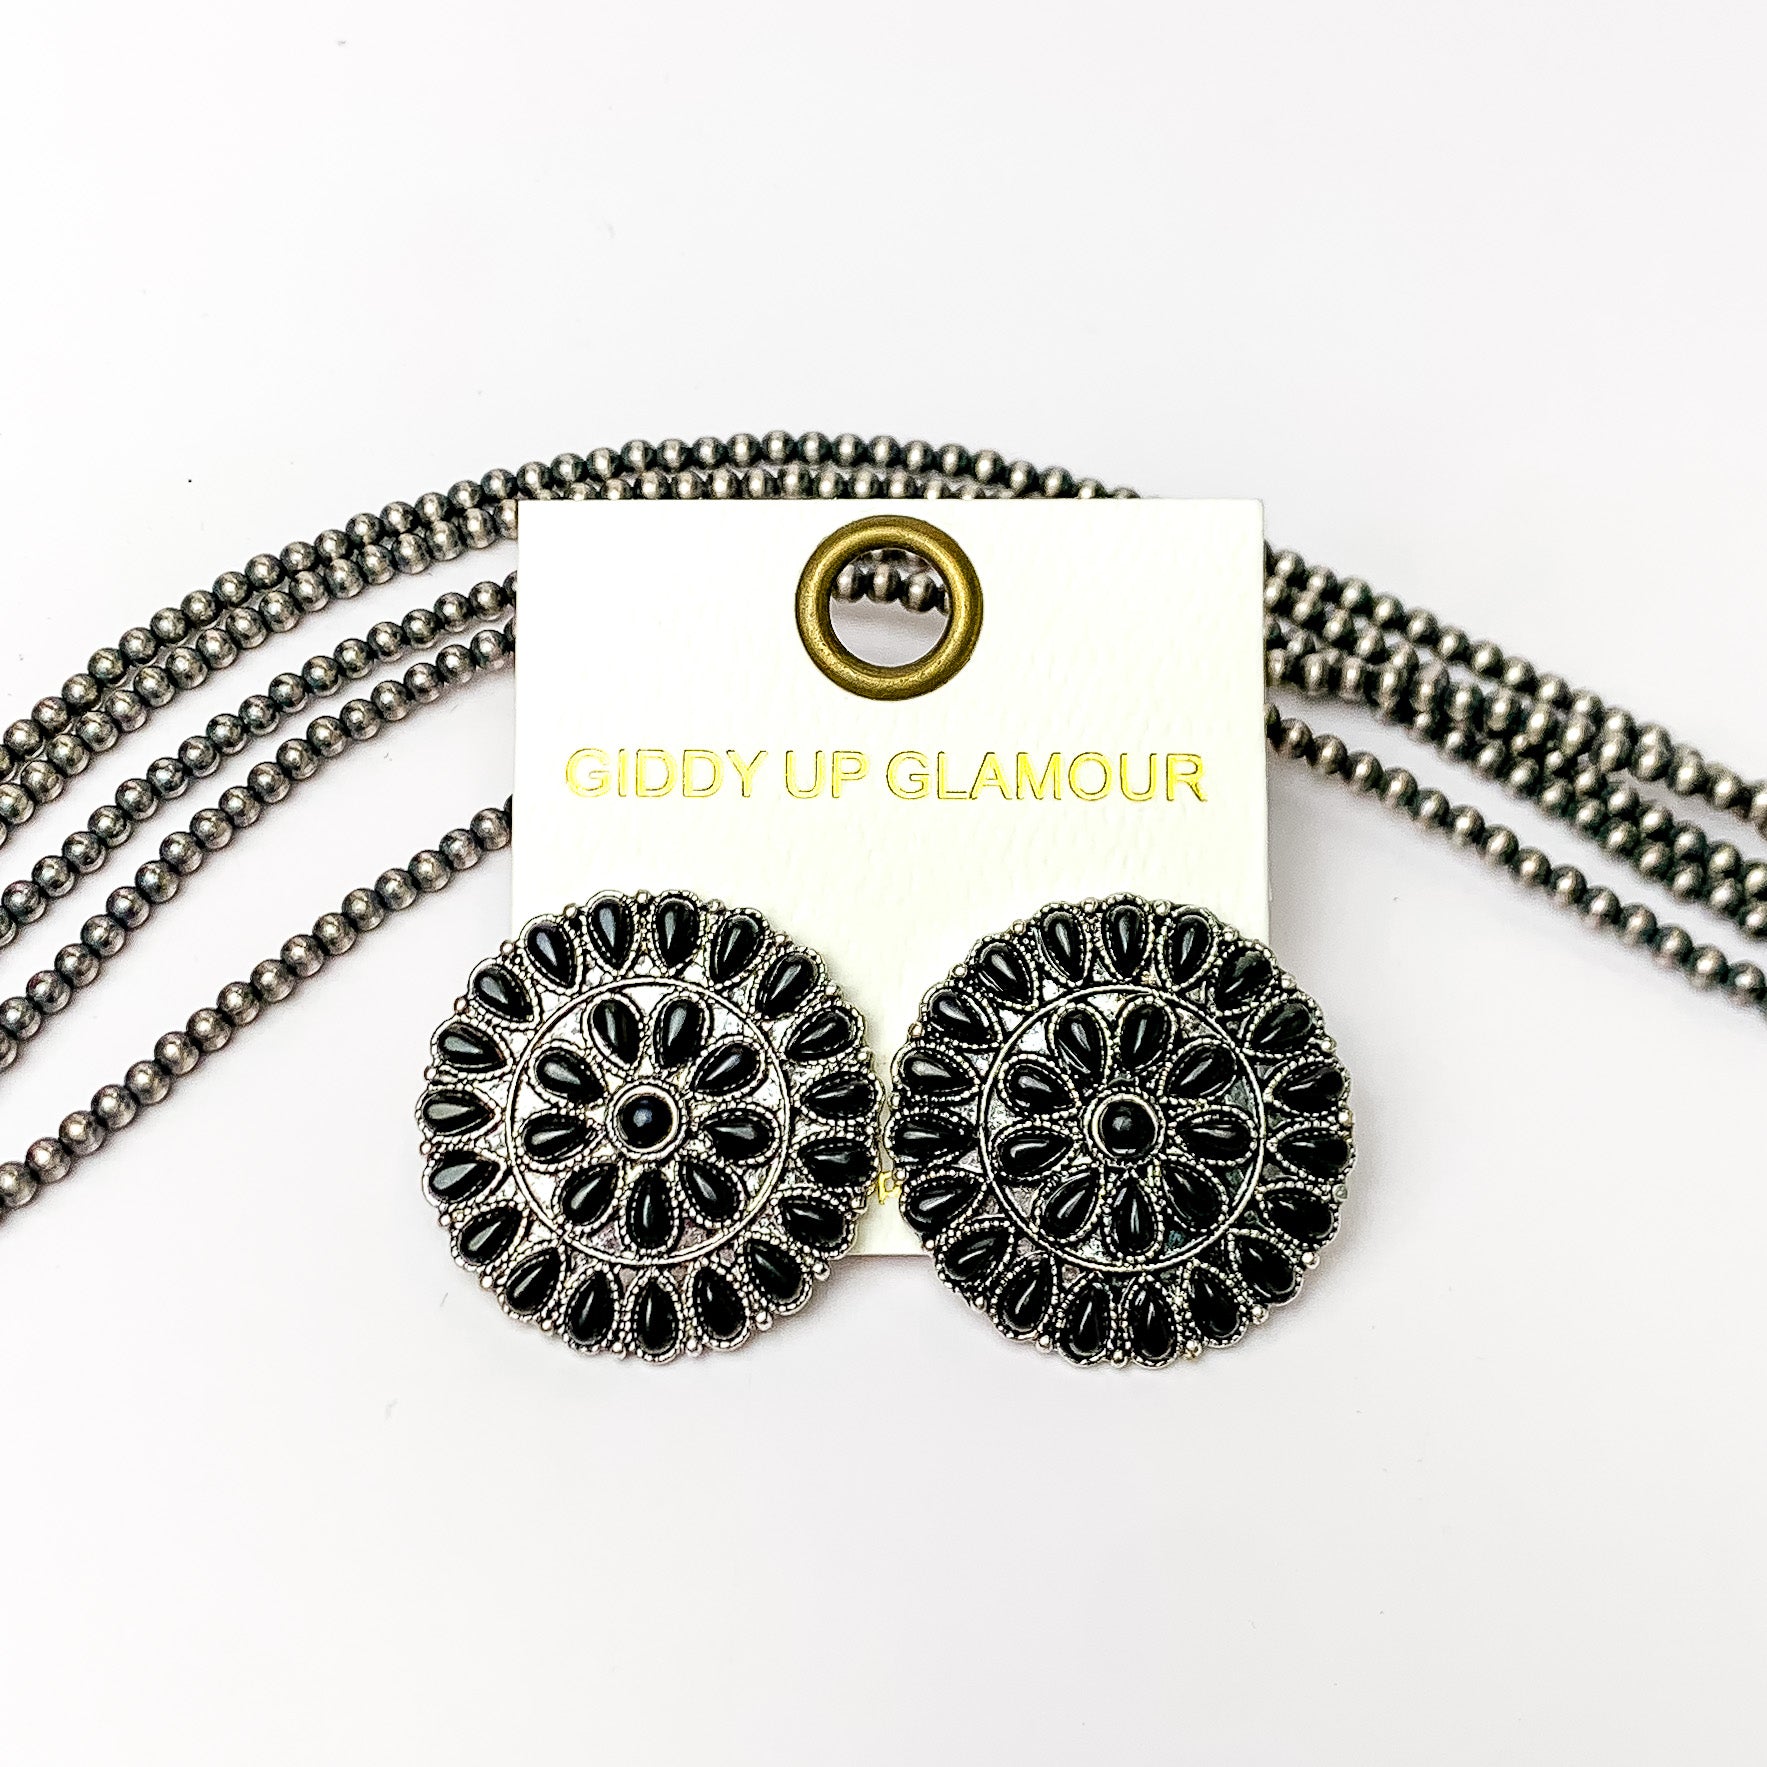 Silver Tone Circle Cluster Stud Earrings with Black Stones. Pictured on a white background with beads through the background.